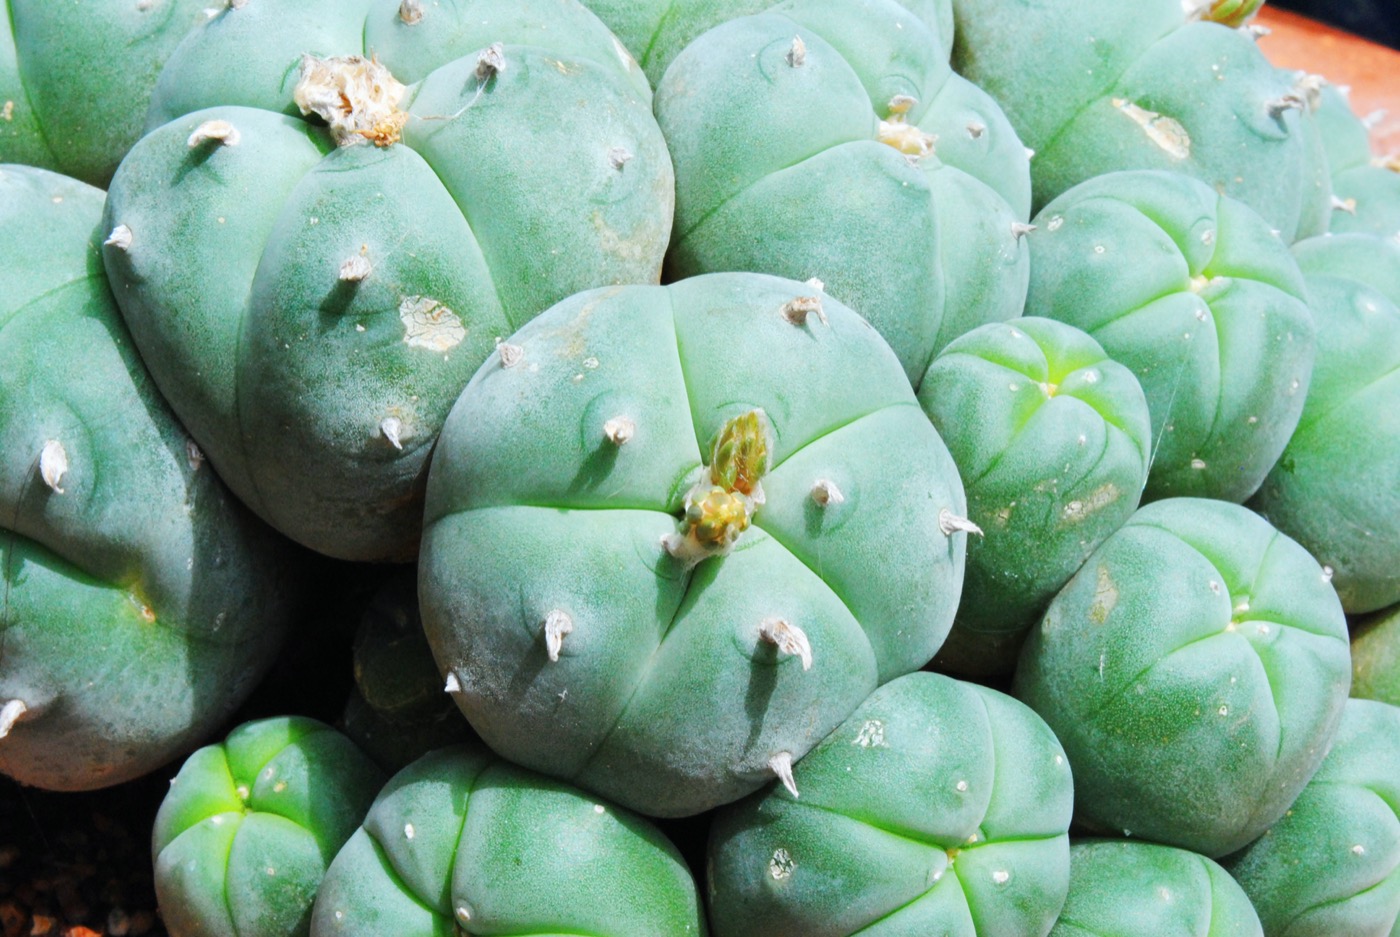 A cluster of bulbous green mescaline peyote cacti in Mexico